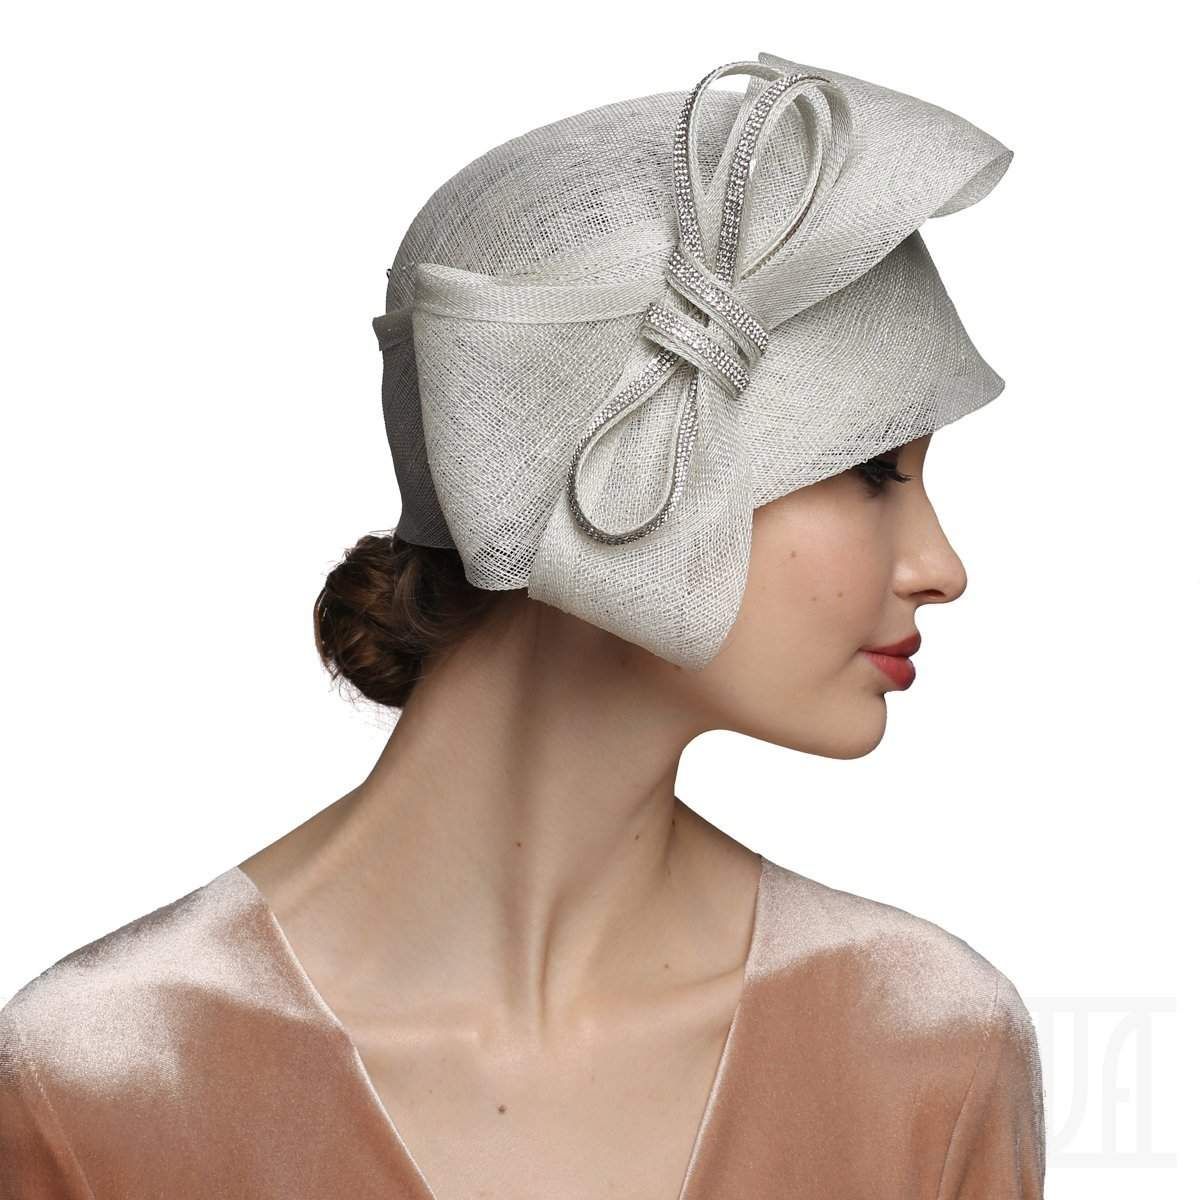 Styling
With Cloche Hat